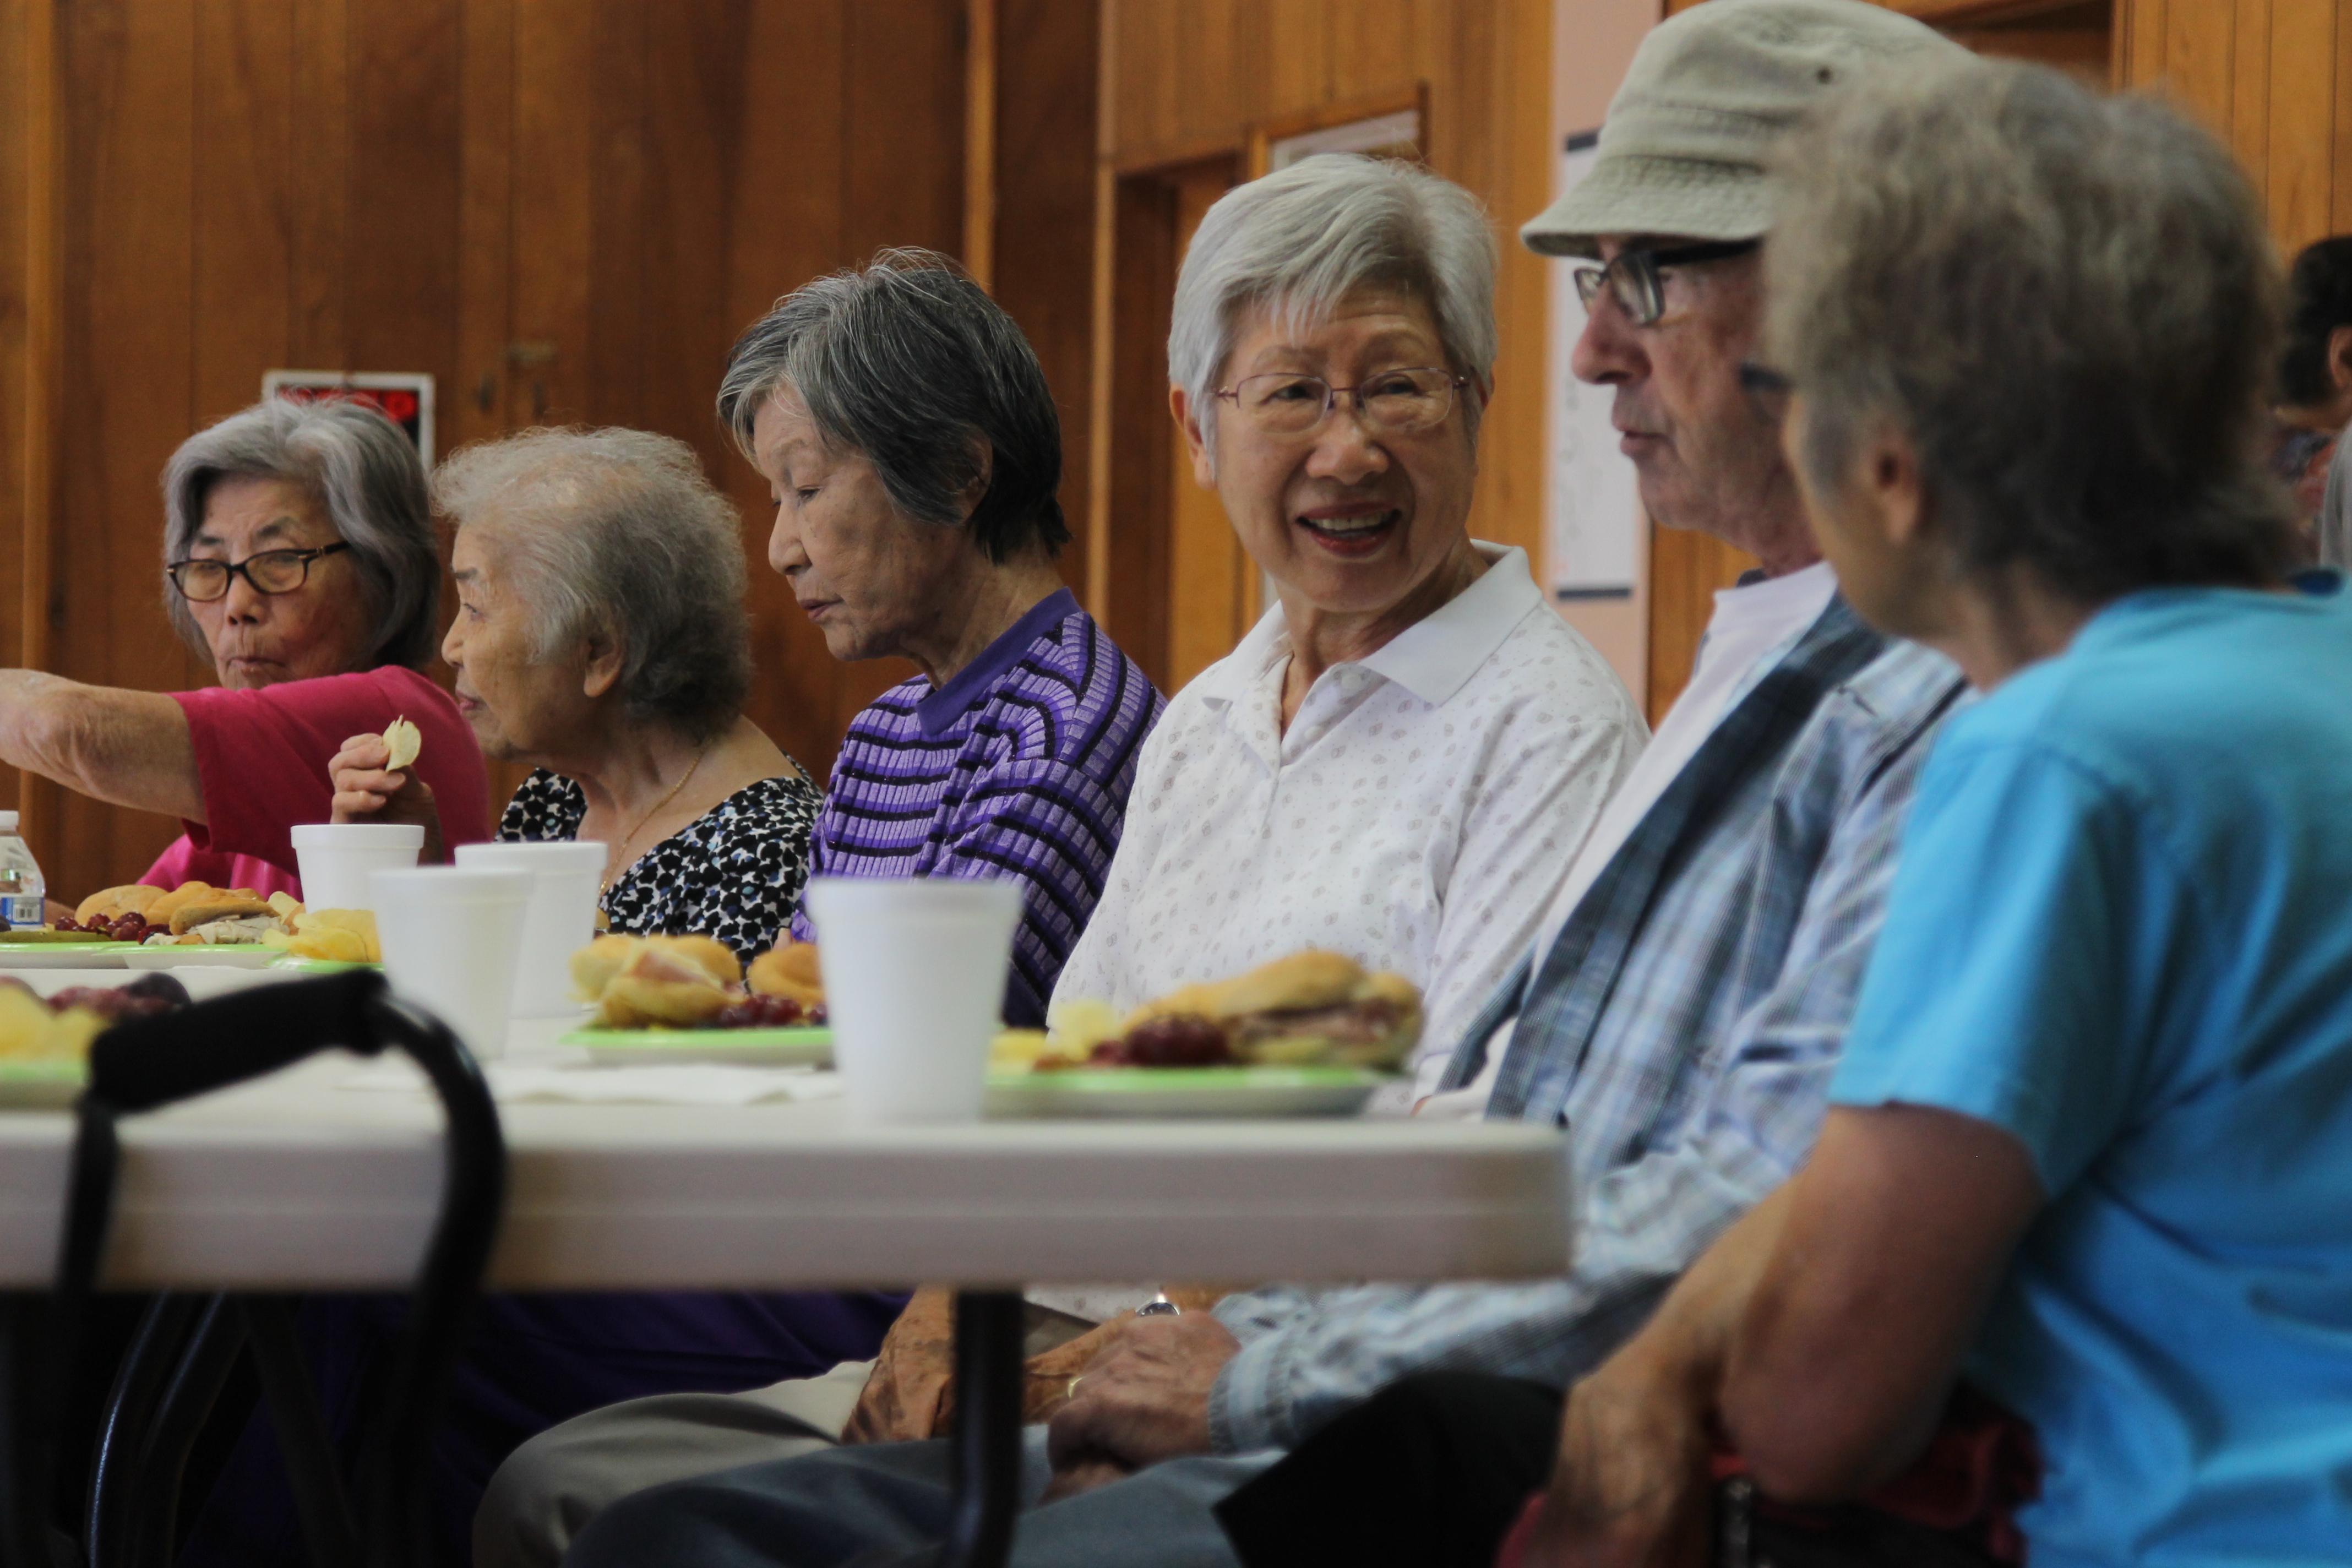 Older adults sitting at a table eating